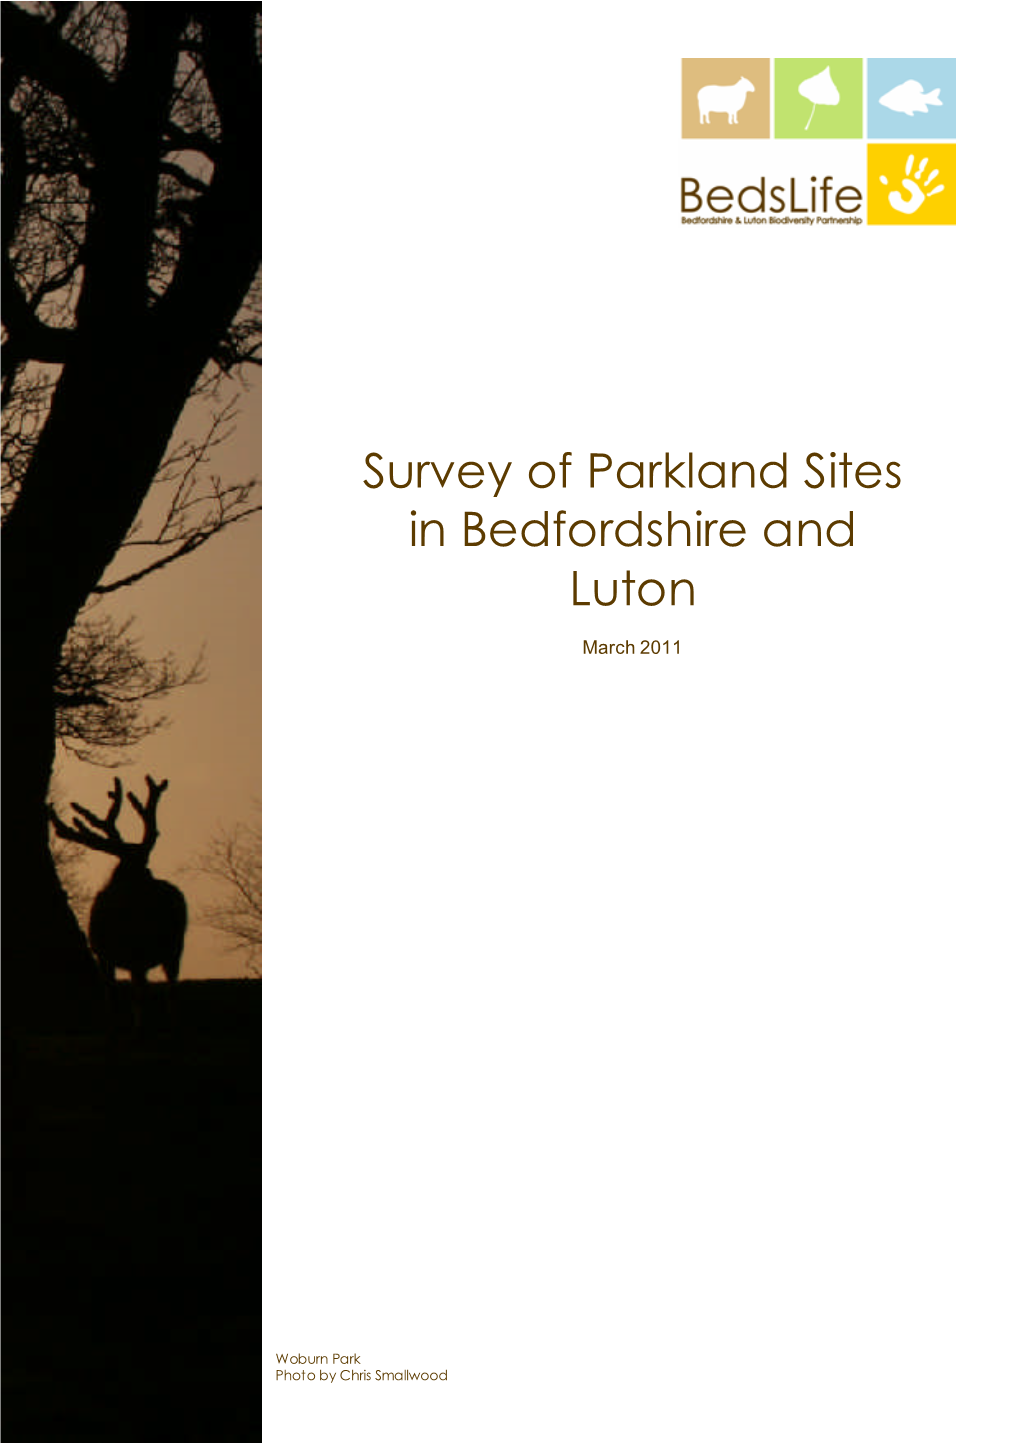 Survey of Parkland Sites in Bedfordshire and Luton